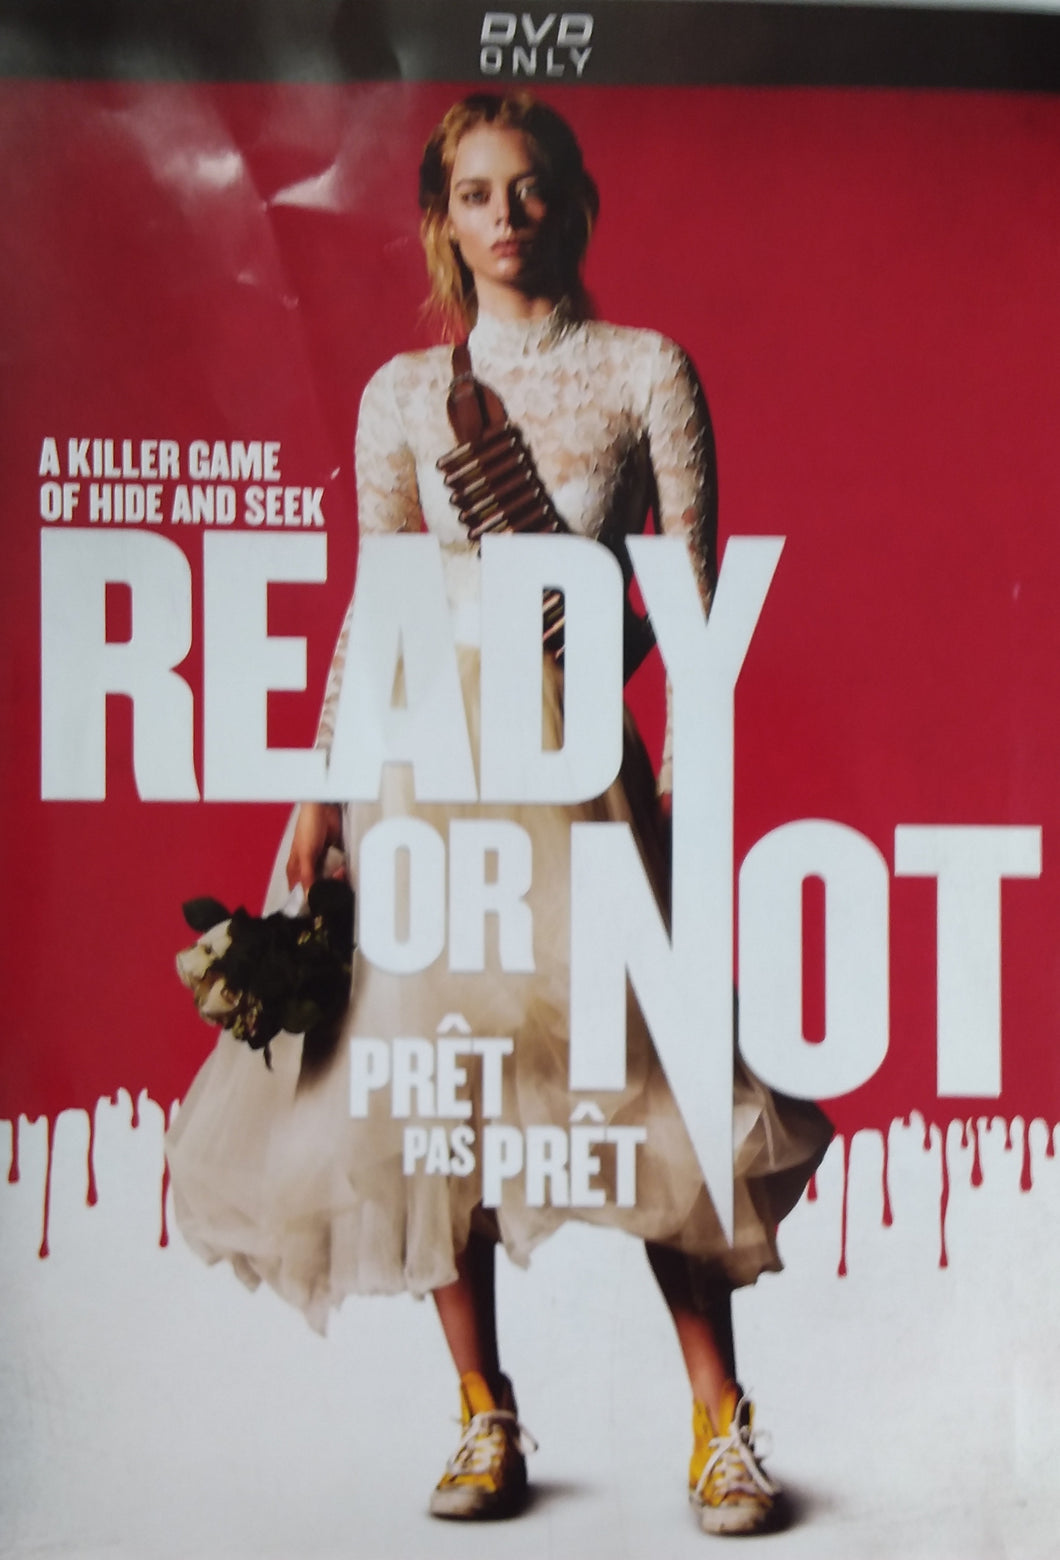 Ready Or Not (2019)